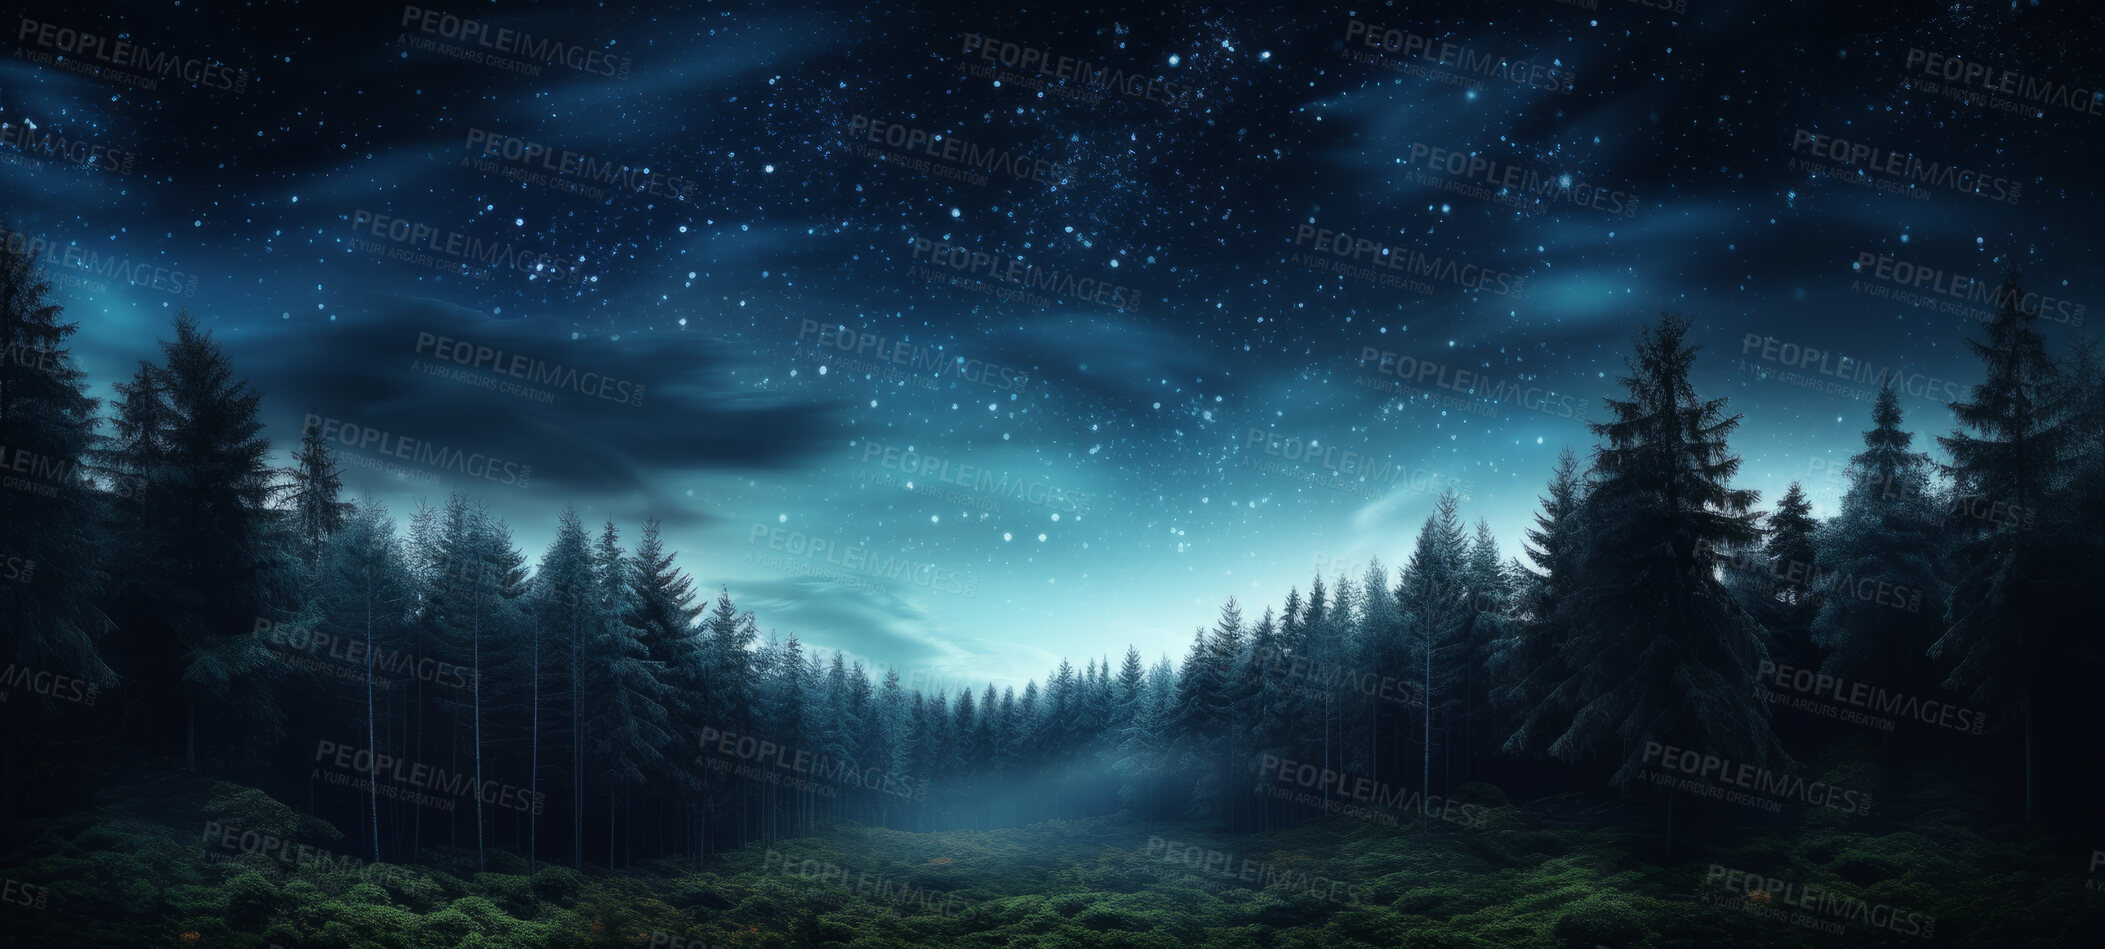 Buy stock photo Wide view or panorama of a starry sky seen from the forest or campsite